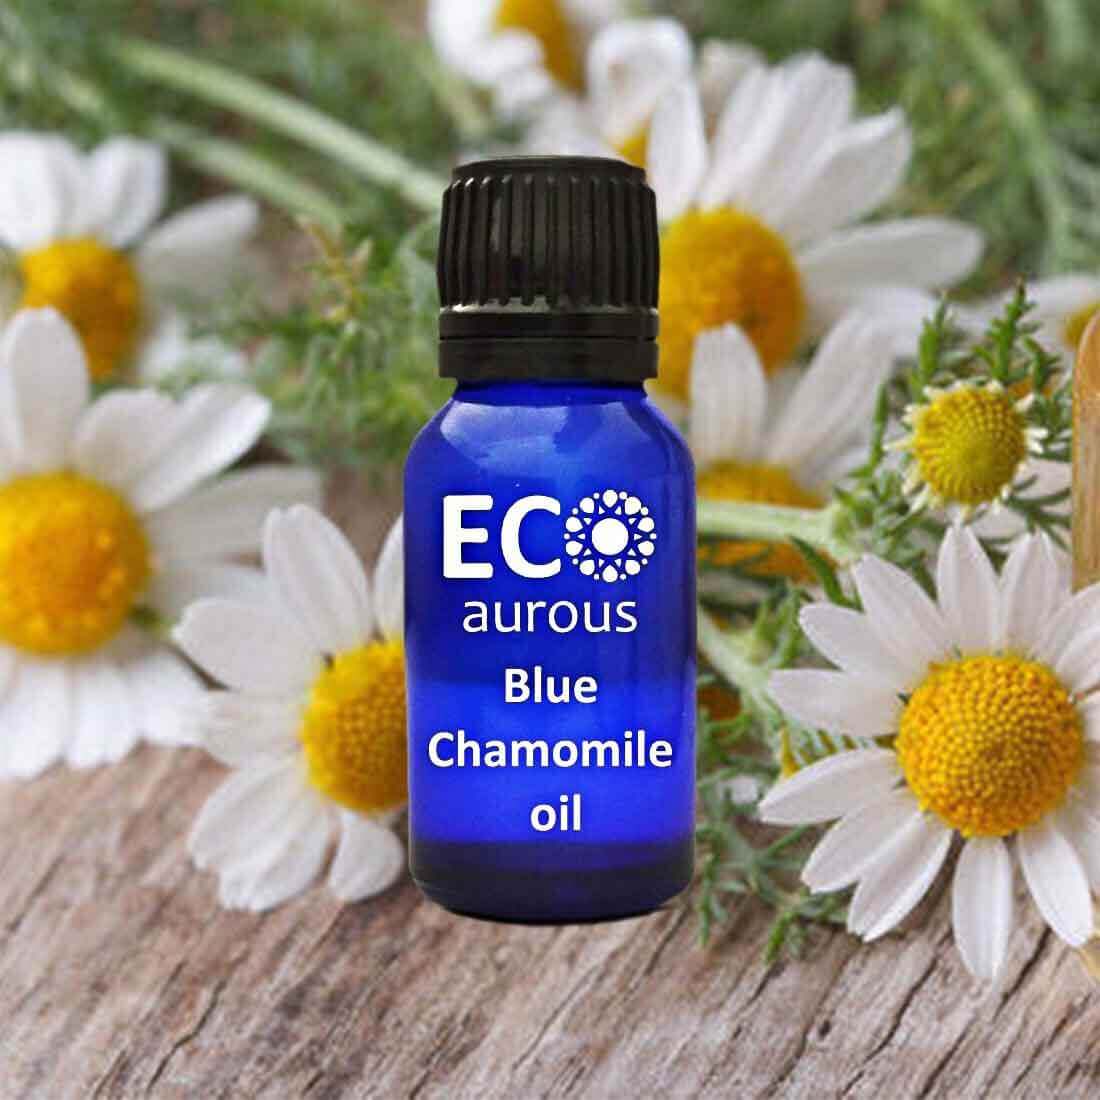 Buy Online German Blue Chamomile Essential Oil at Low Price